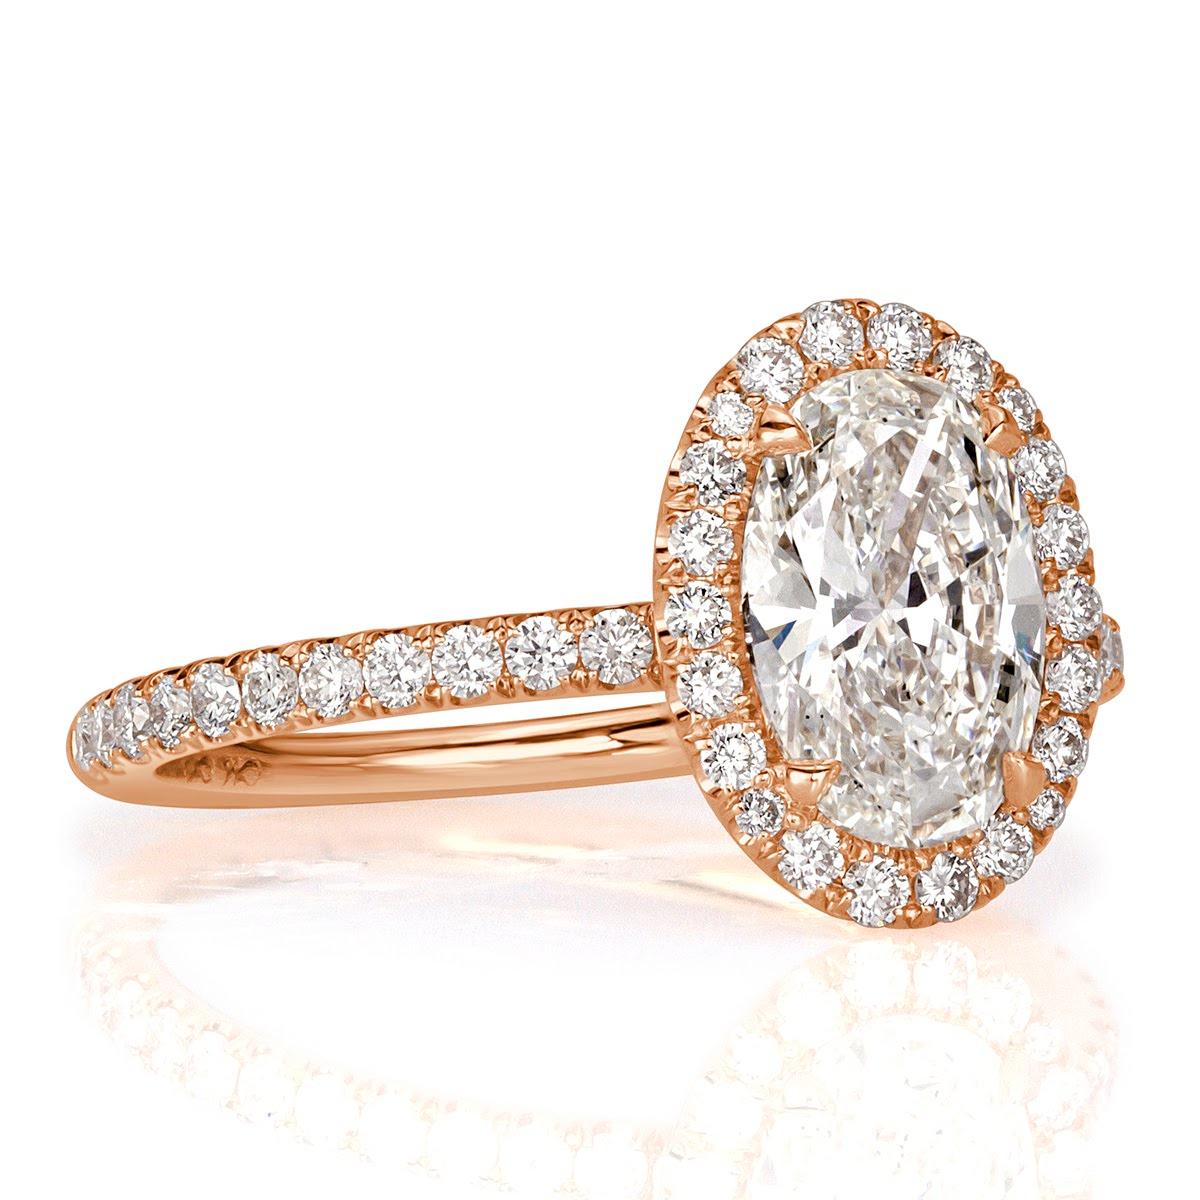 Custom created in 18k rose gold, this beautiful diamond engagement ring showcases a gorgeous 1.74ct oval cut center diamond, GIA certified at I in color, VS1 in clarity. It is has a stunning cut and sparkles with tremendous brilliance. It is